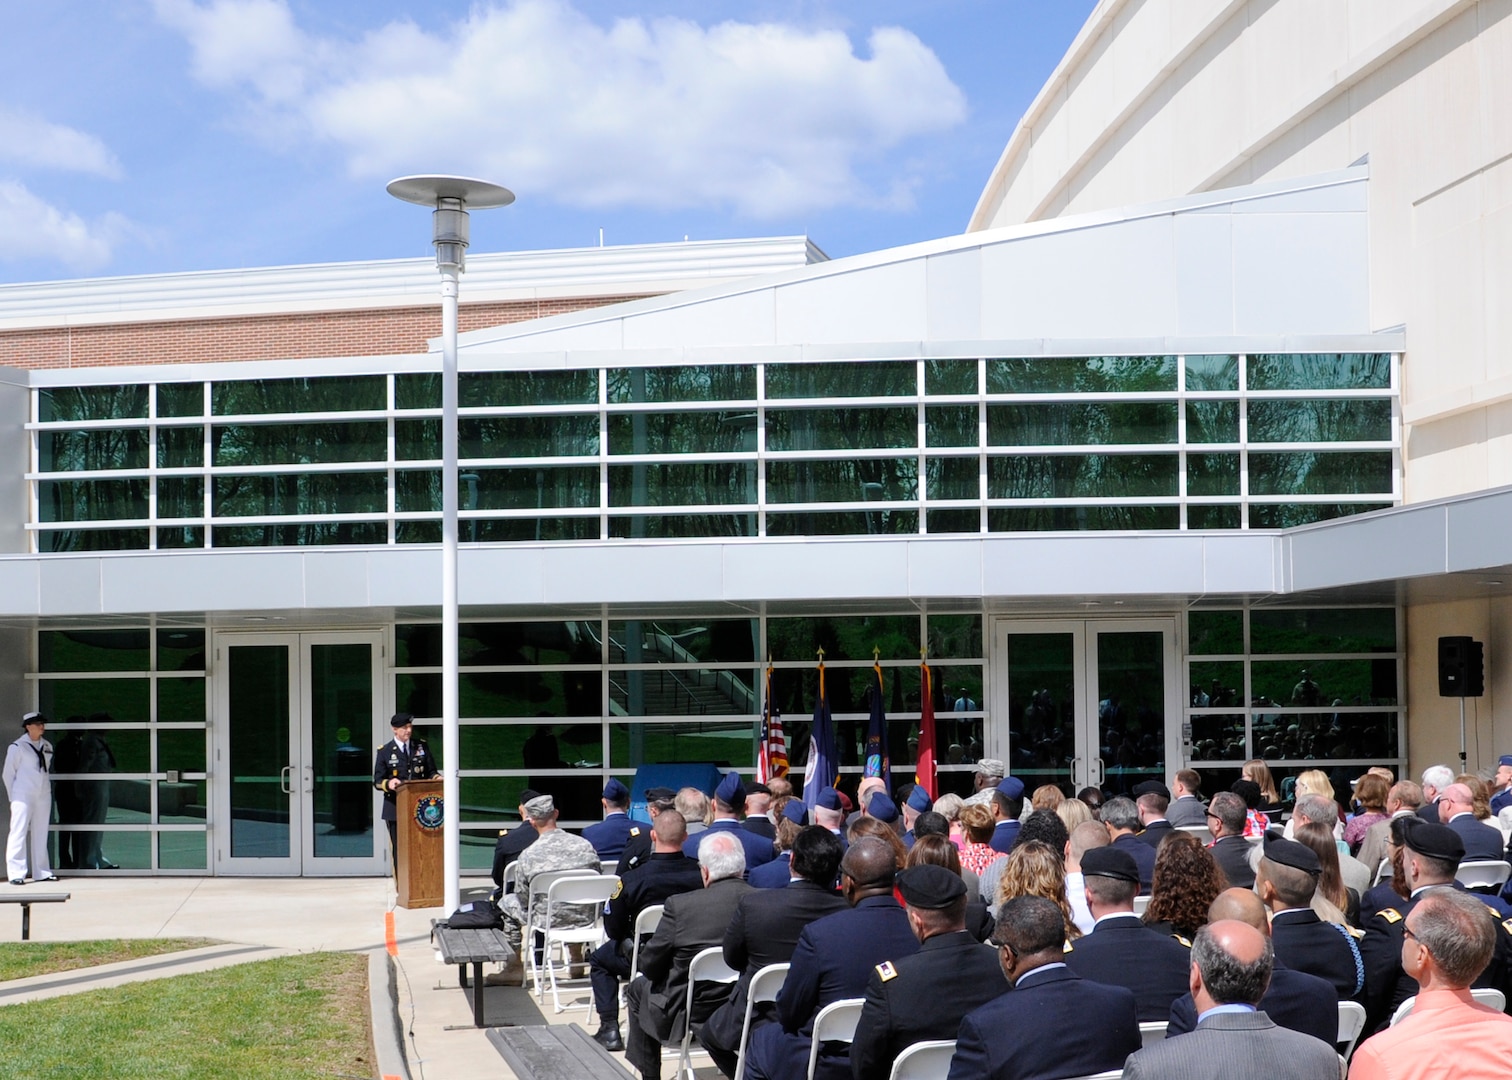 DIA Director Lt. Gen. Michael T. Flynn gives his remarks during a building dedication ceremony in honor of the late Col. James N. Rowe at the DIA Field Support Activity Rivanna Station in Charlottesville, Va. 